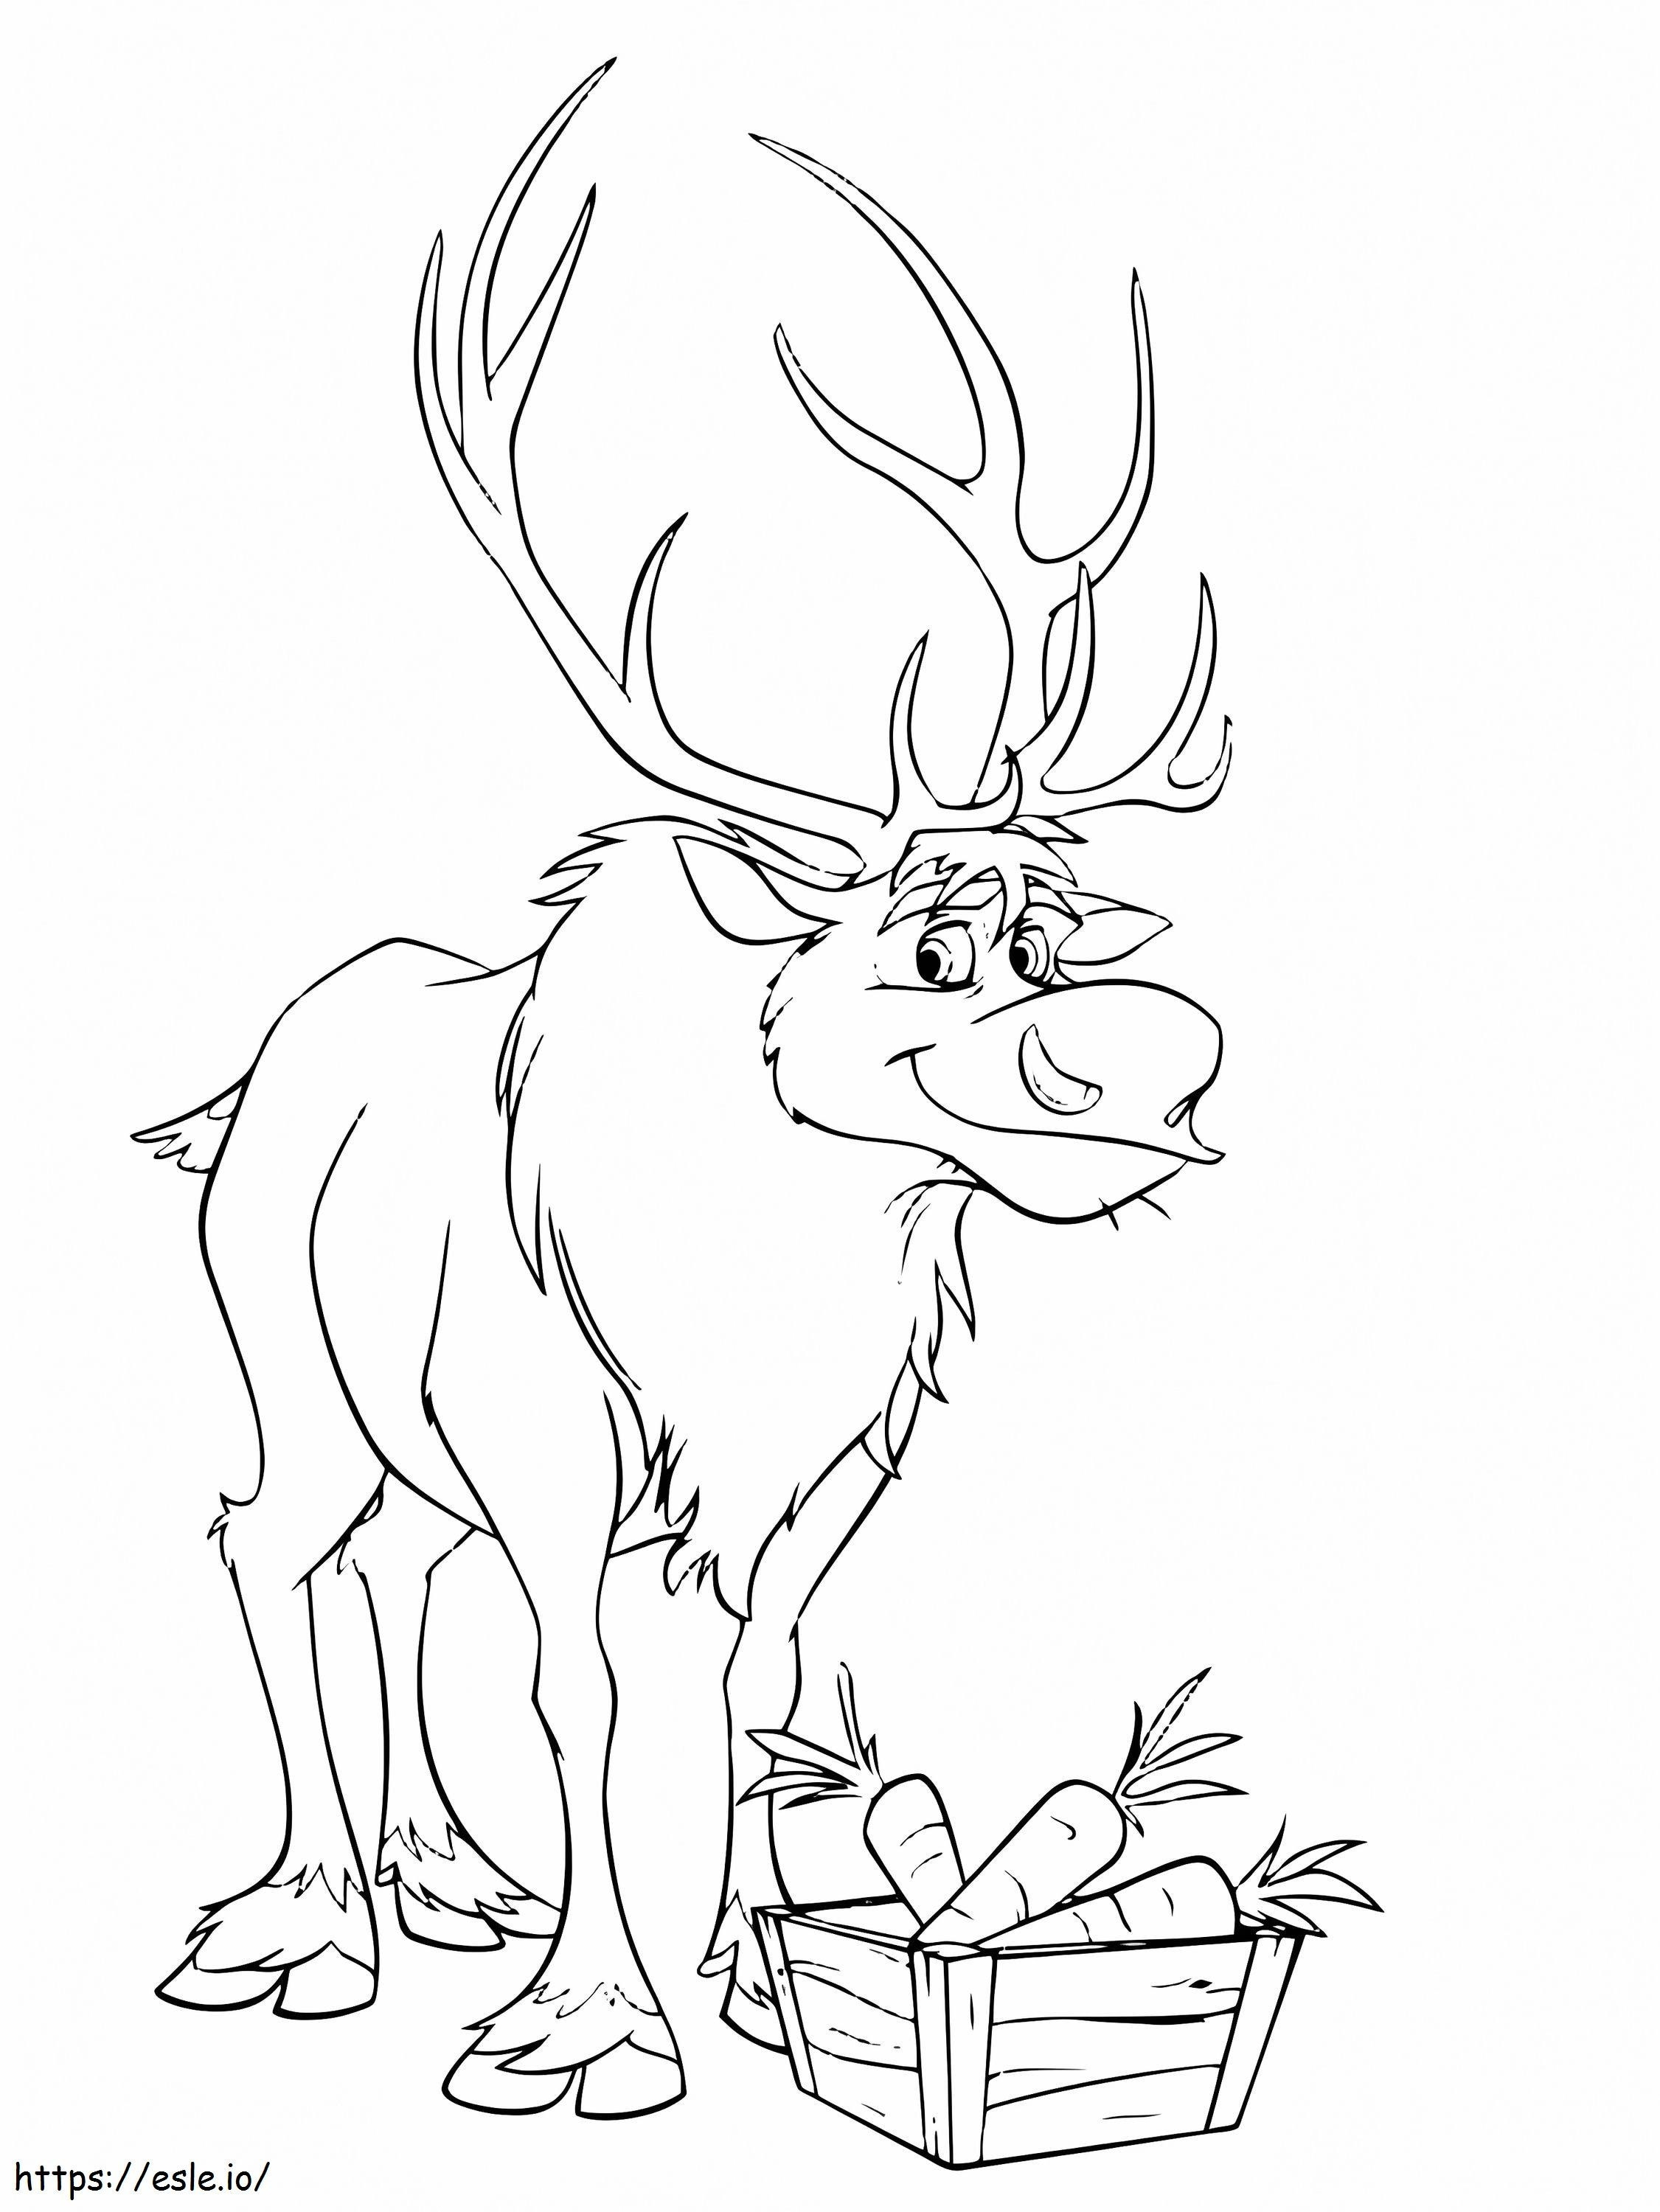 Sven Smiling coloring page